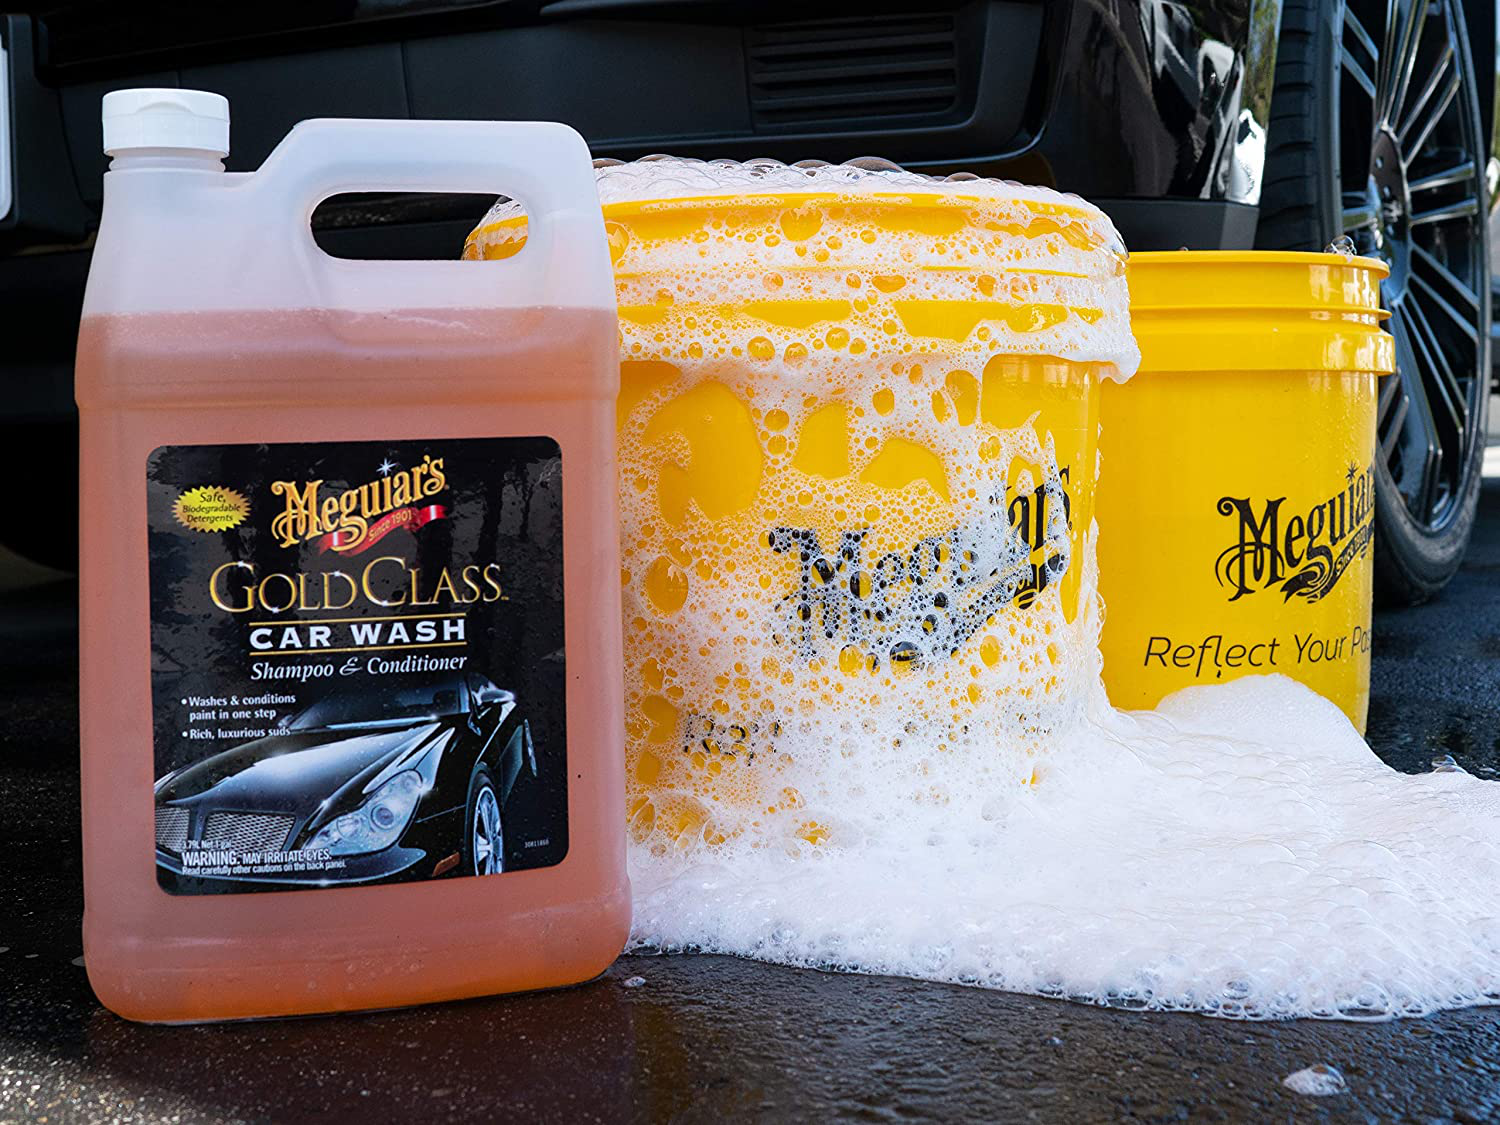 Meguiar's VBUCKET3.5GAL Yellow Bucket – Make Car Washing Easy With Bright Bucket for Water and Suds – 3.5 gal